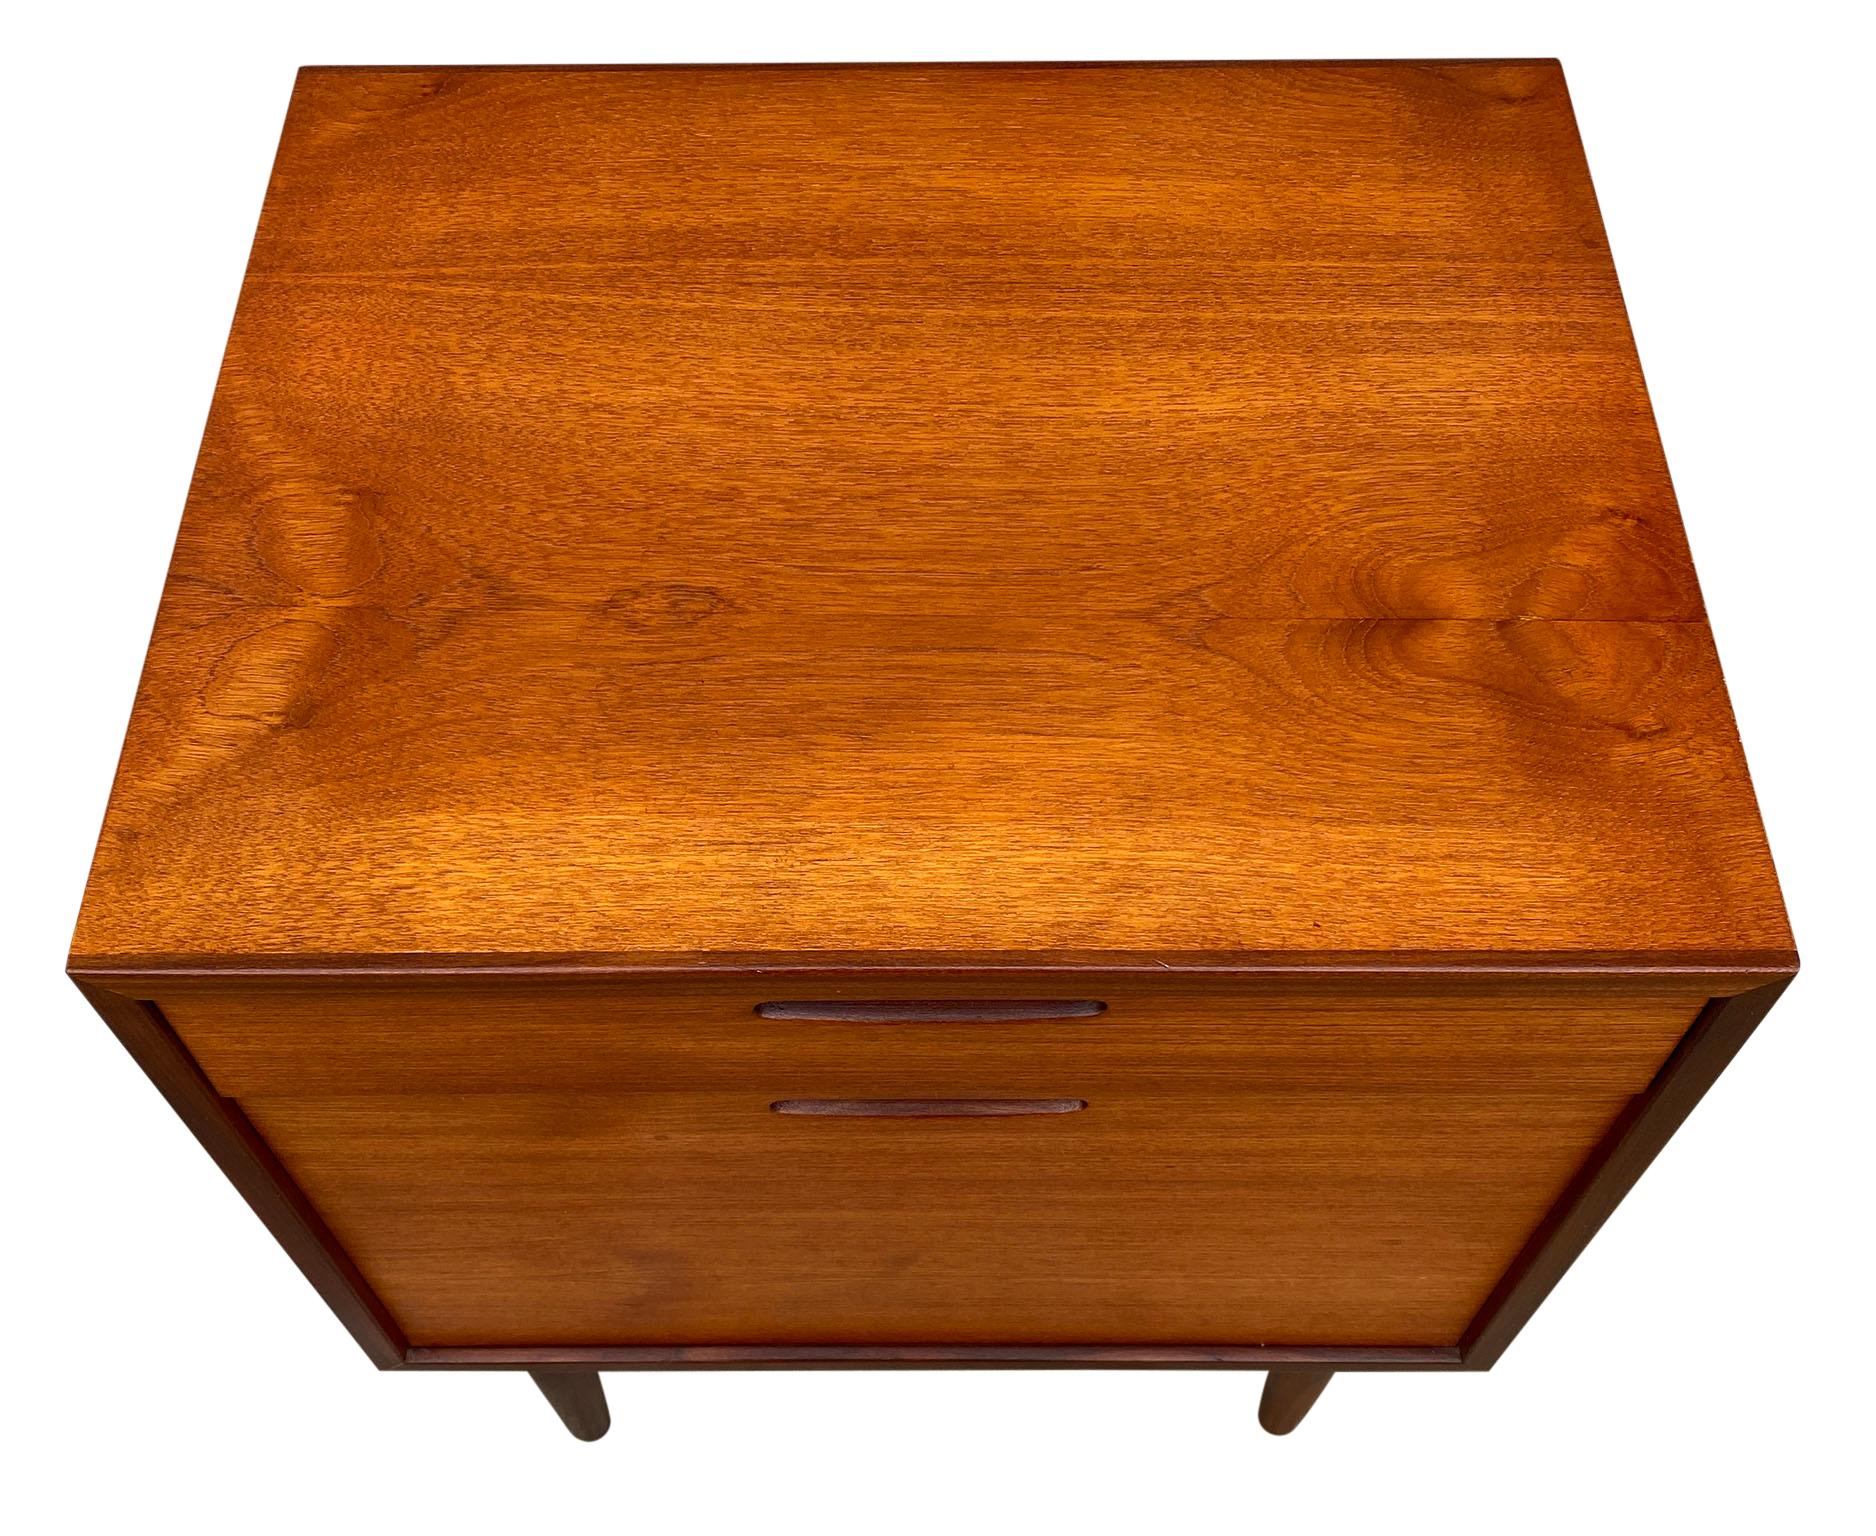 (1) Beautiful single drawer nightstand designed by Ib Kofod-Larsen and manufactured by J. Clausen Brande Møbelfabrik, Denmark, 1960. Very high quality Scandinavian design, superb finished all around and even the teak wooden back. Nice details are